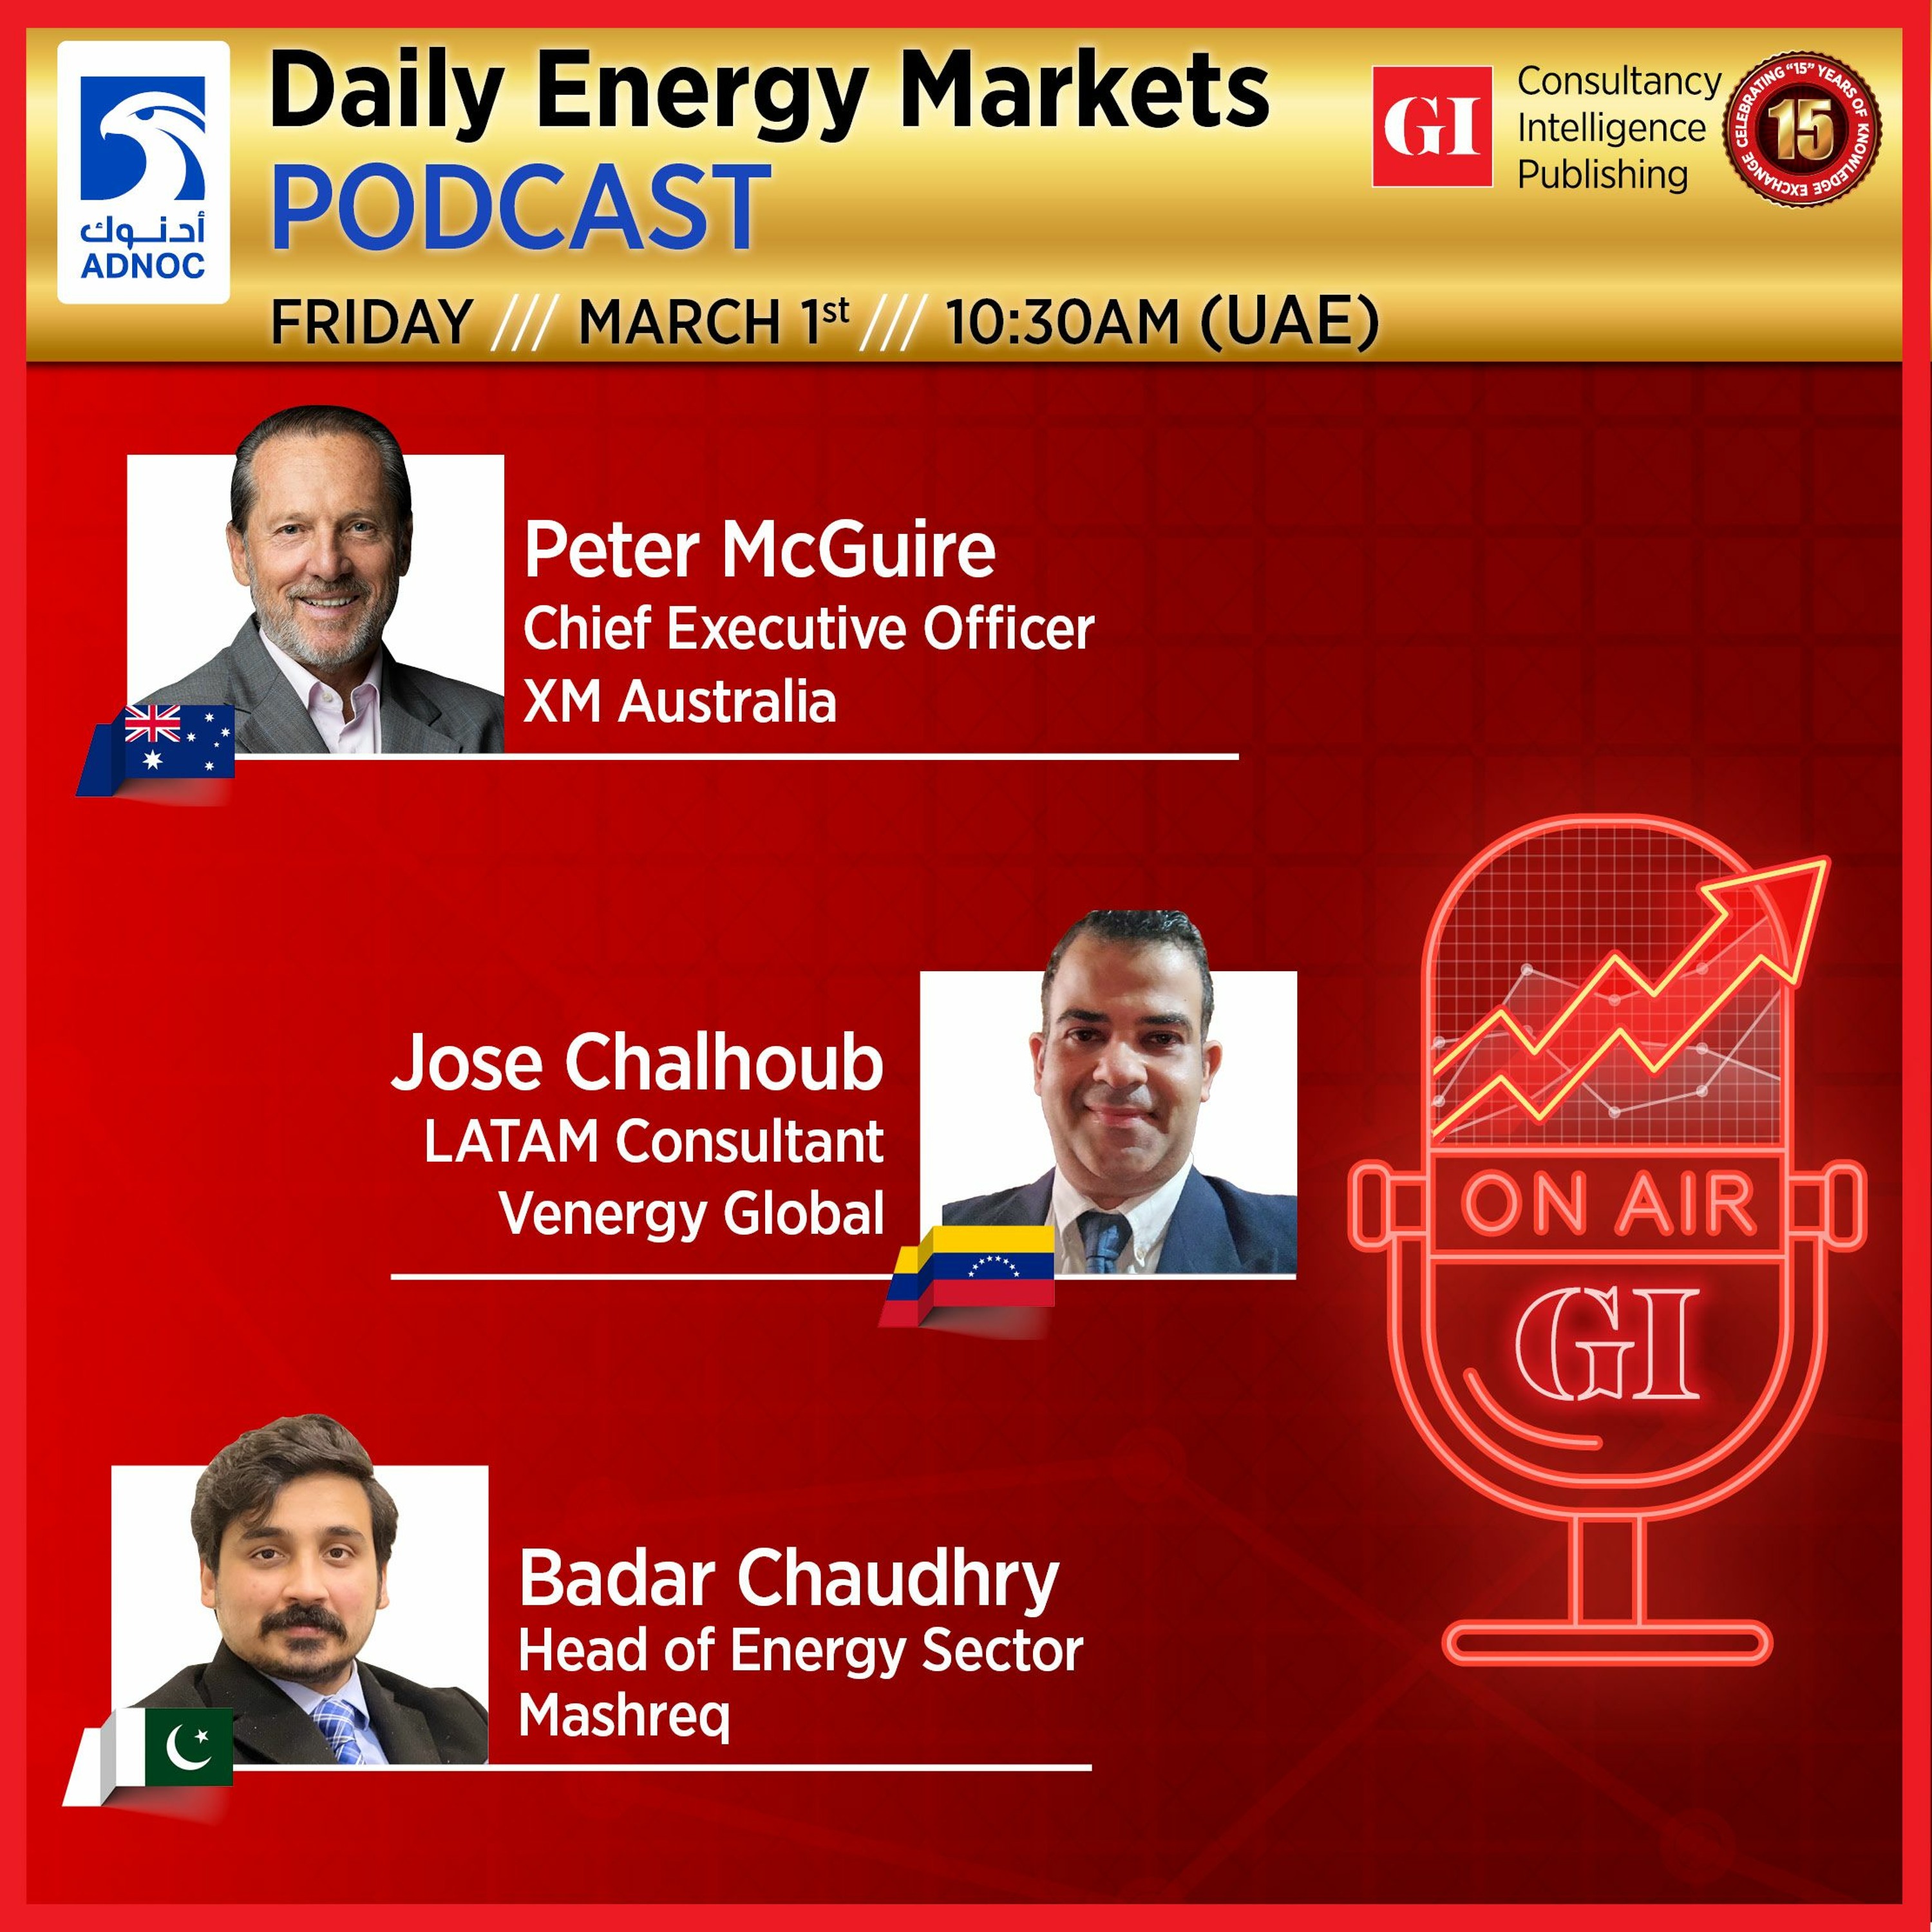 PODCAST: Daily Energy Markets - March 1